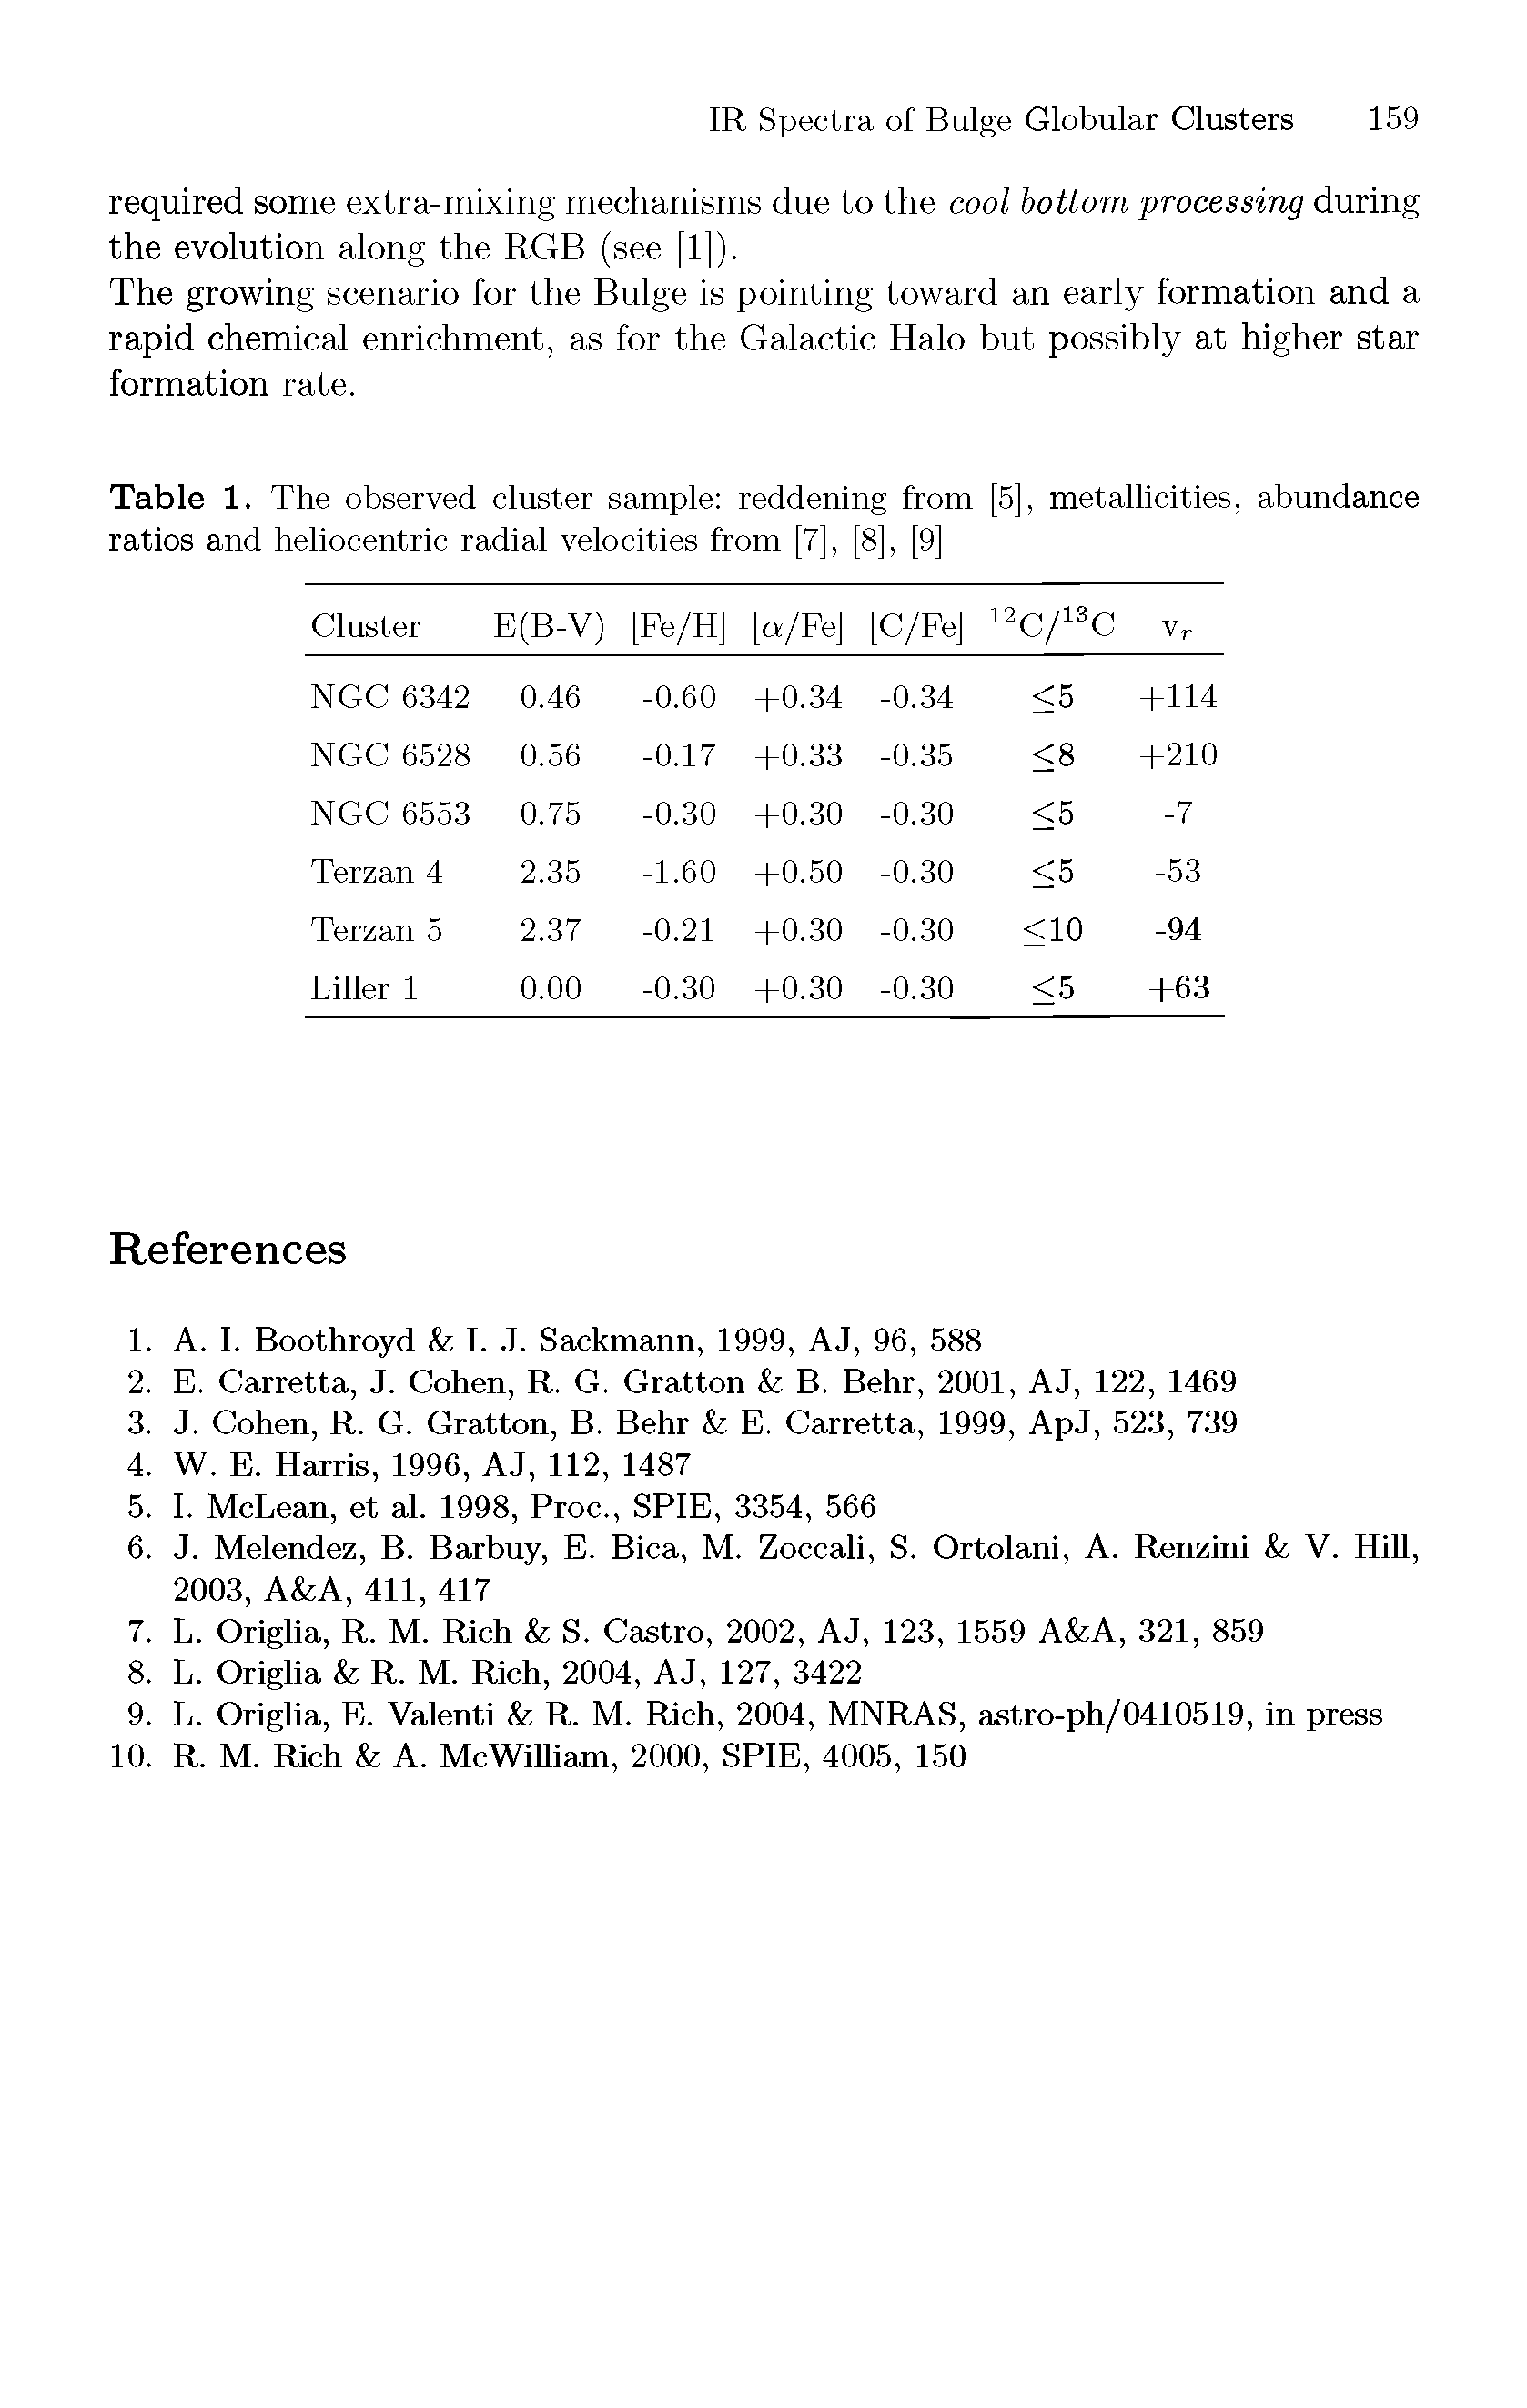 Table 1. The observed cluster sample reddening from [5], metallicities, abundance ratios and heliocentric radial velocities from [7], [8], [9]...